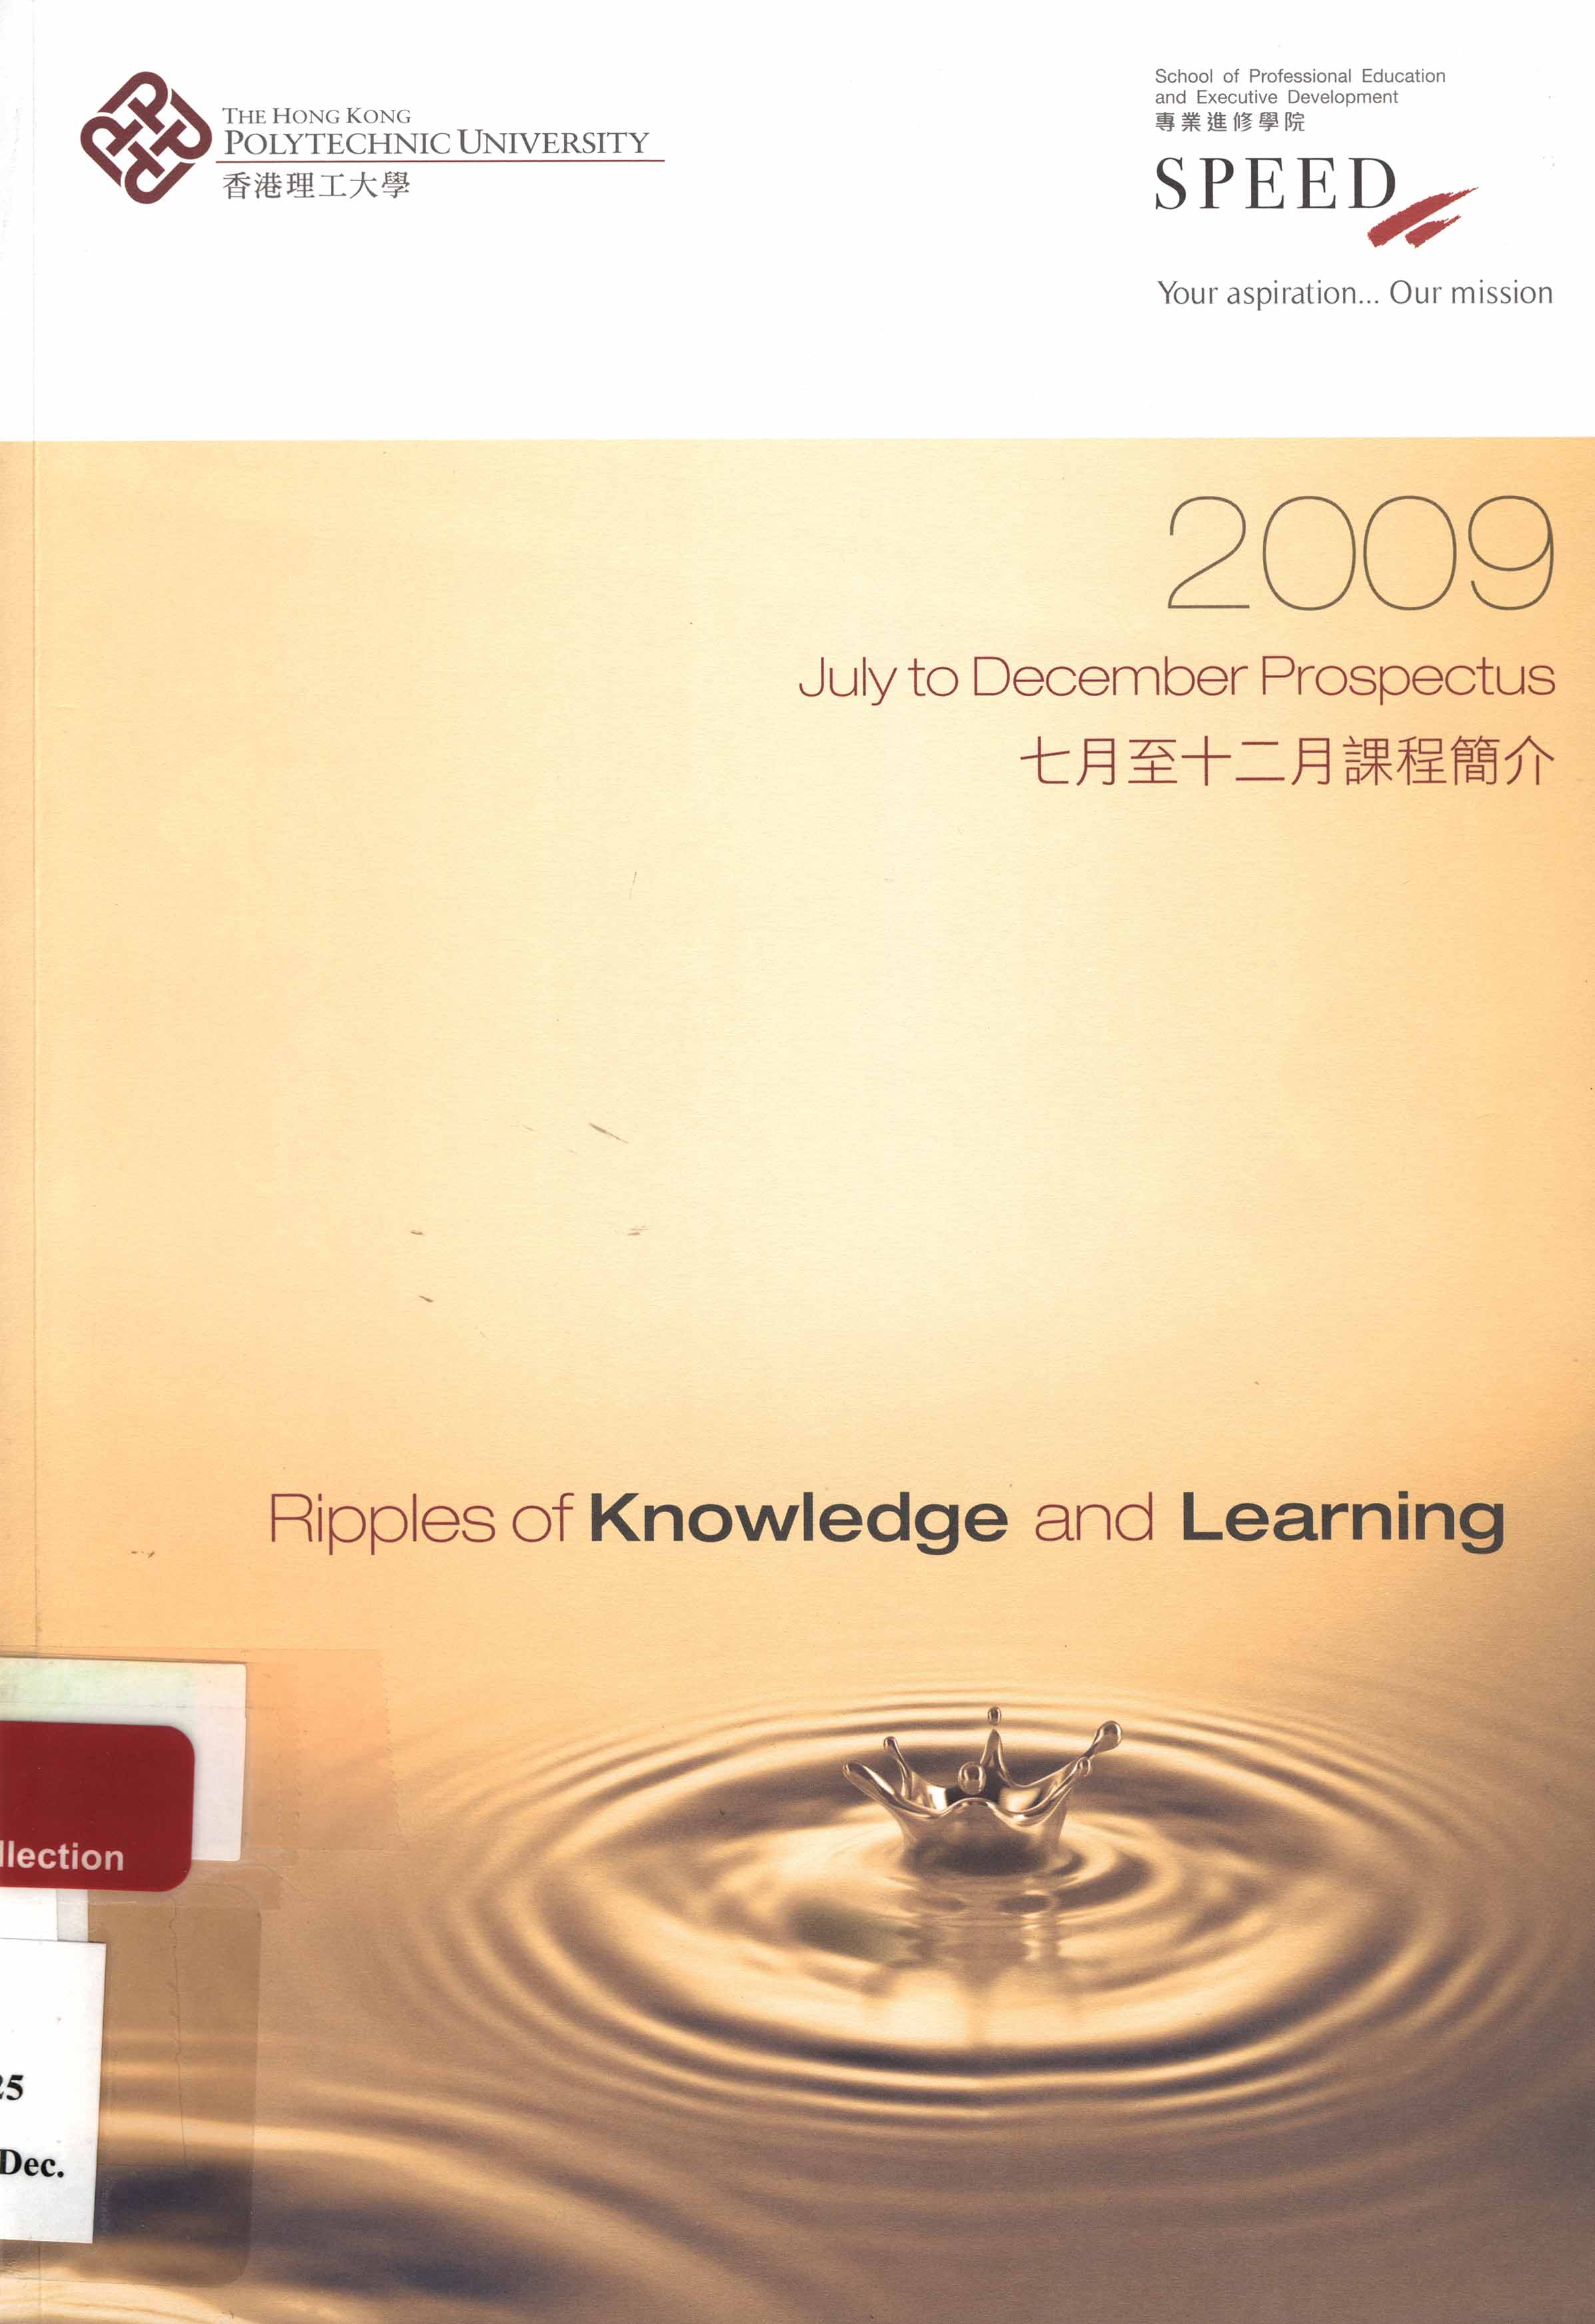 Prospectus [School of Professional Education and Executive Development (SPEED) - July to December 2009]